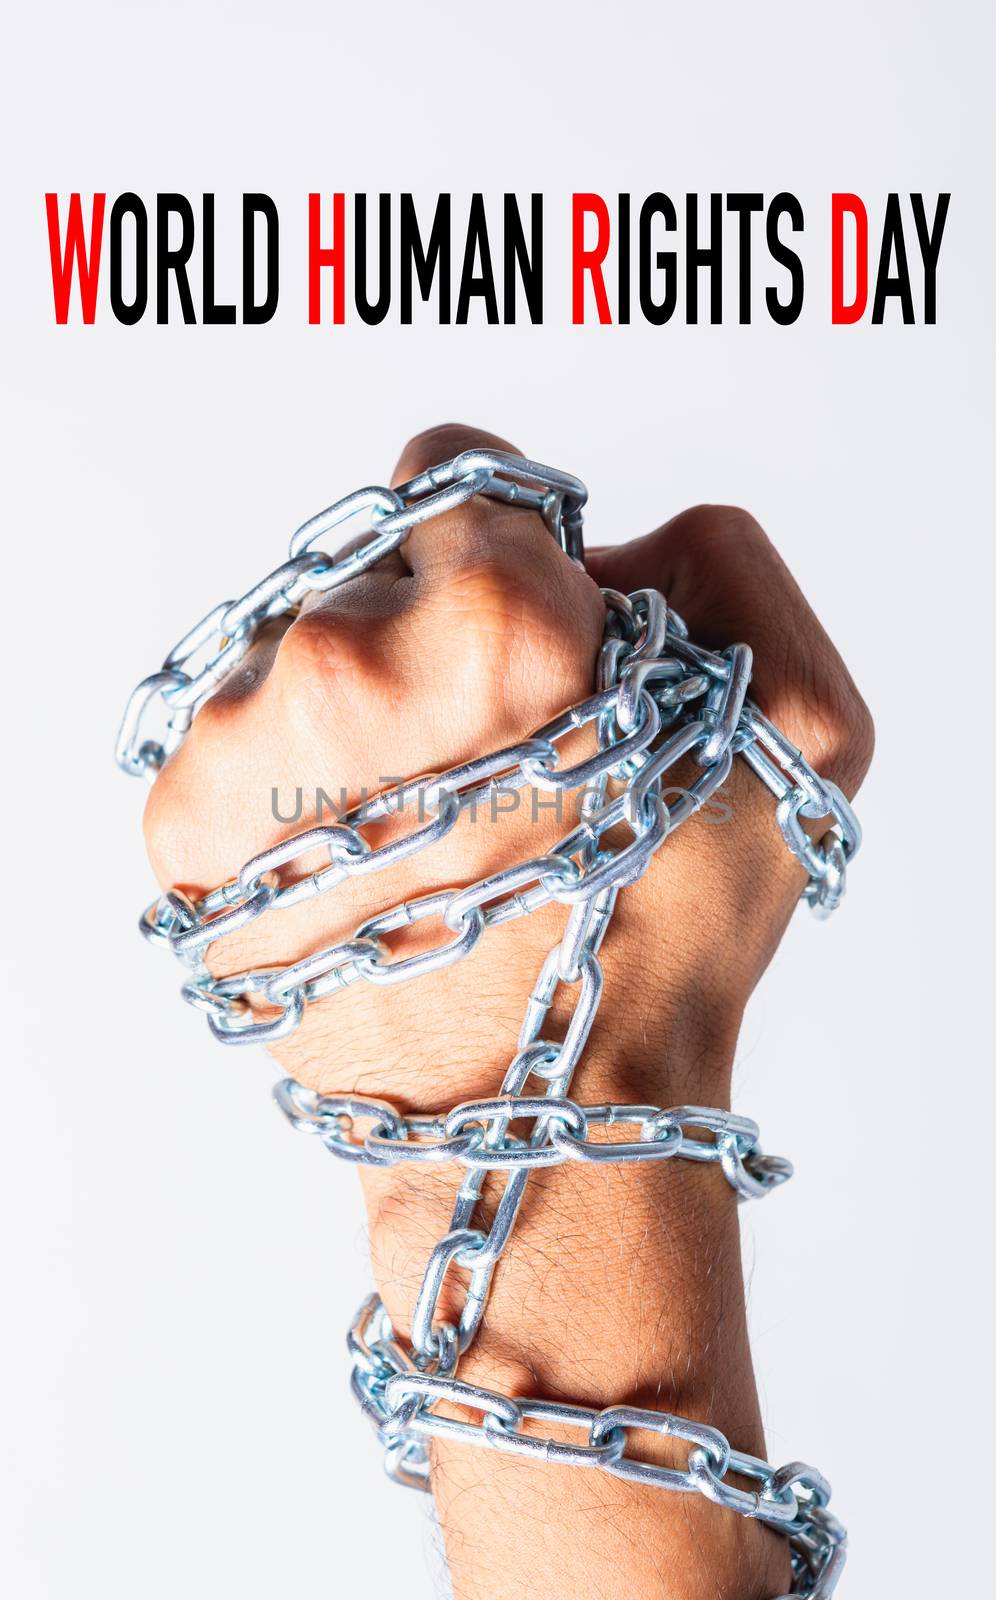 Chained fist hands with WORLD HUMAN RIGHTS DAY text by Sorapop